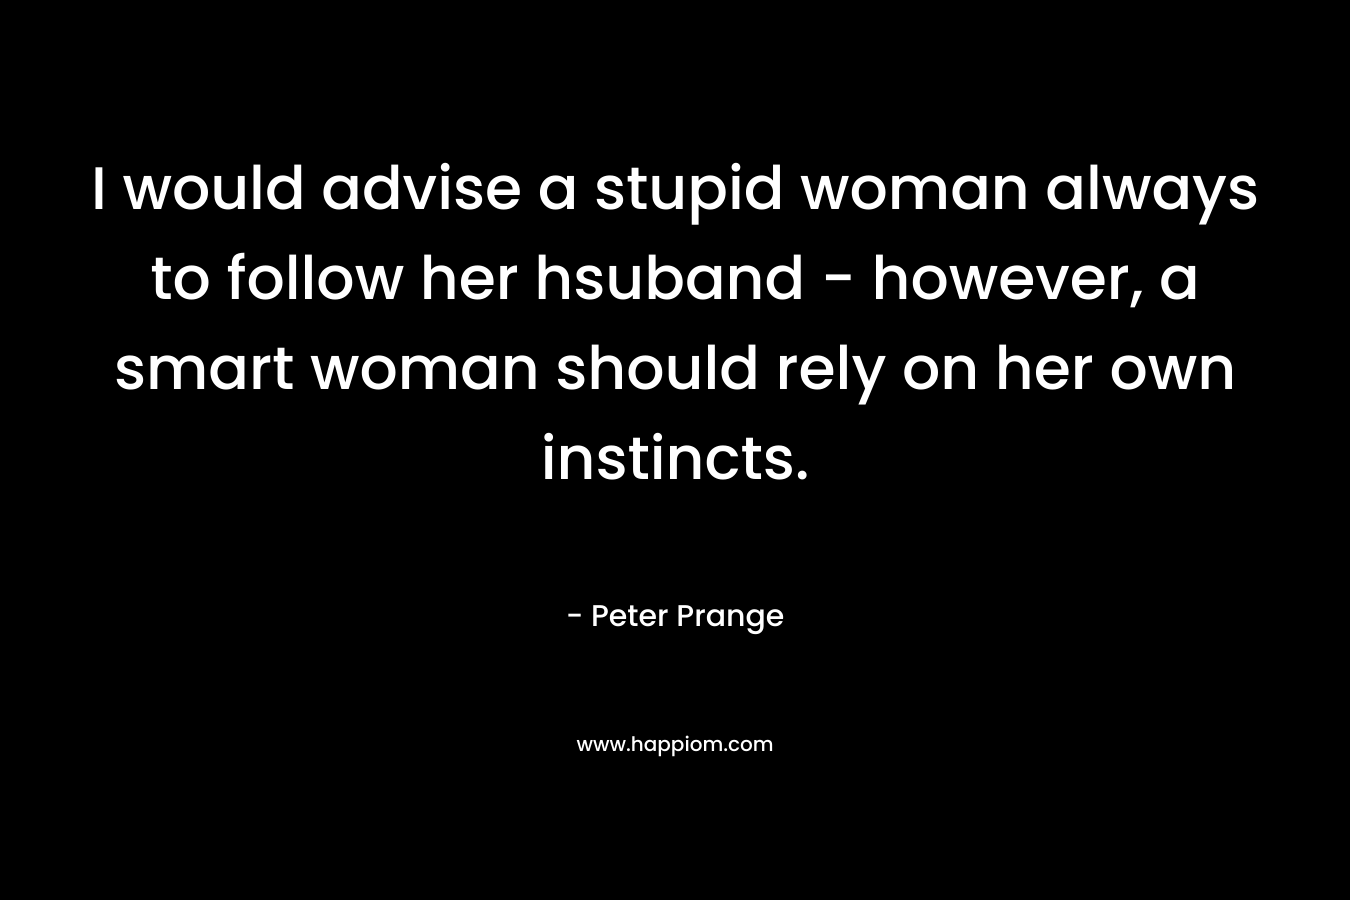 I would advise a stupid woman always to follow her hsuband – however, a smart woman should rely on her own instincts. – Peter Prange